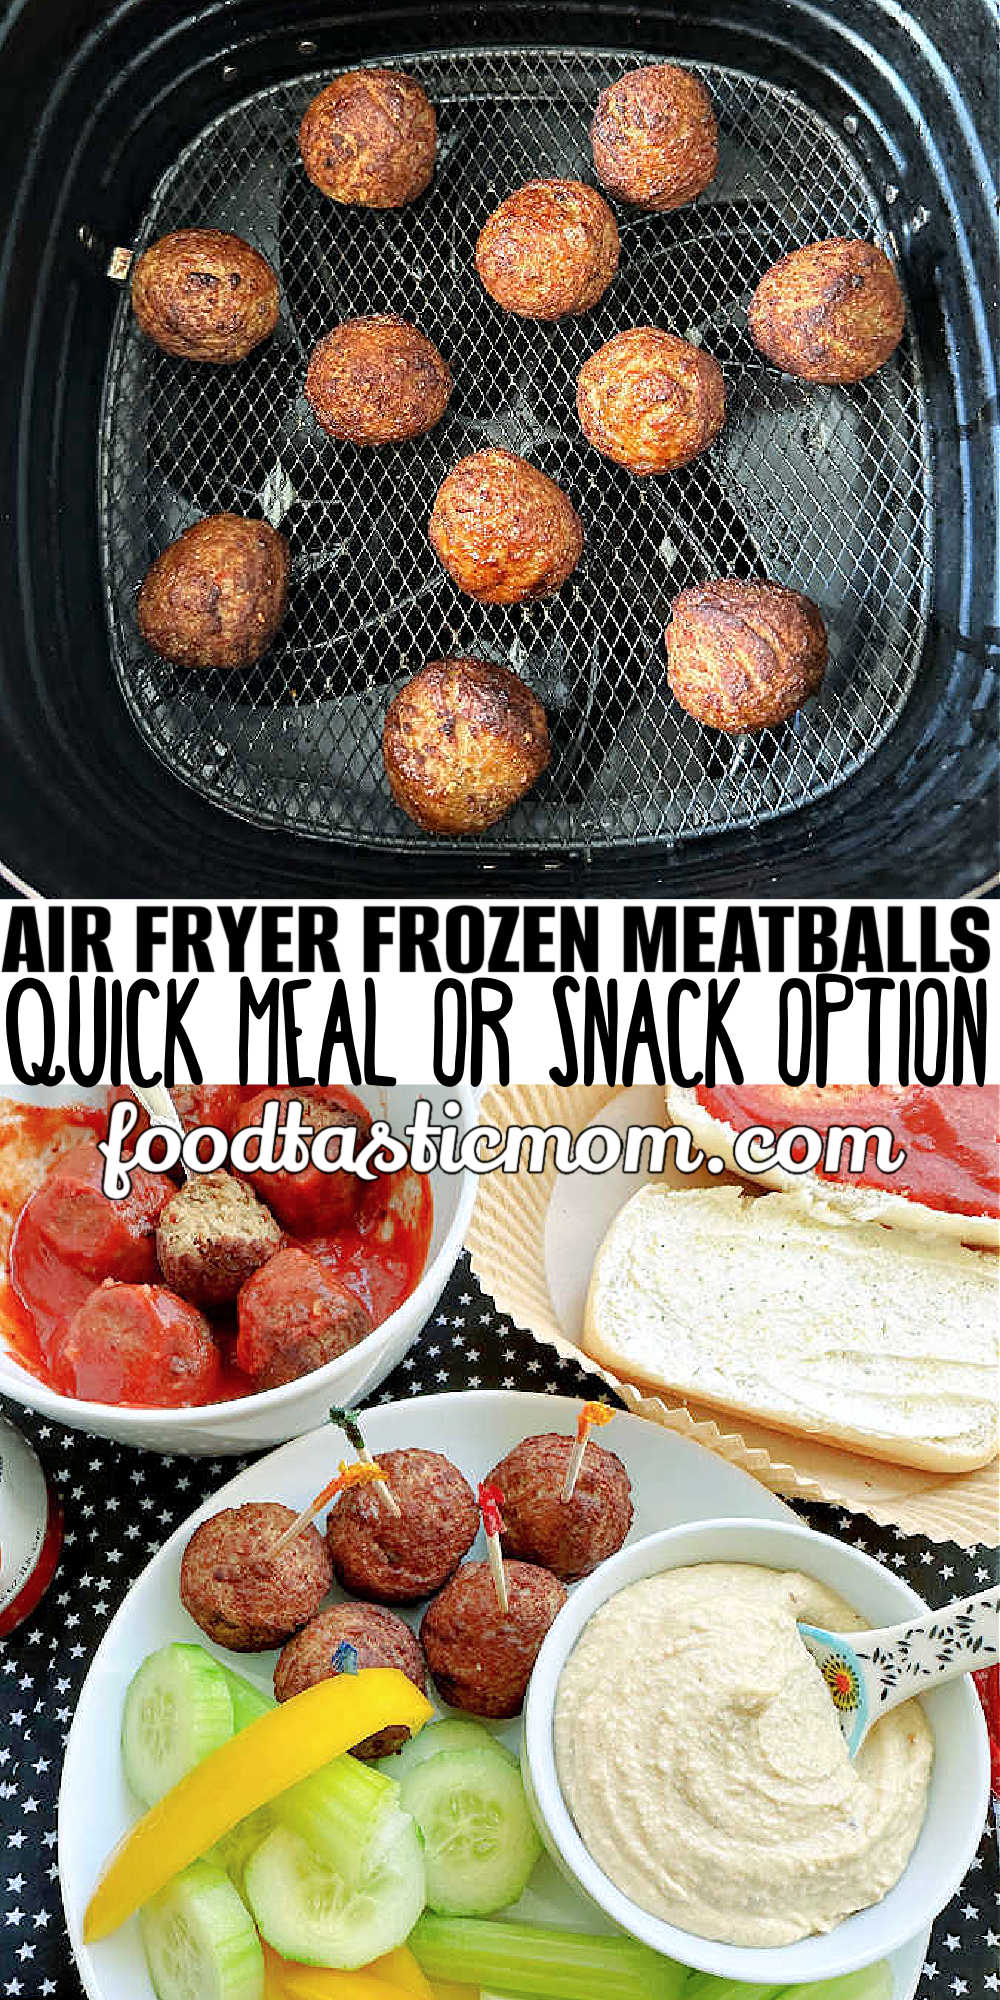 Make a variety of easy and delicious snacks and meals with perfectly cooked Air Fryer Frozen Meatballs. Instructions work for any brand. @foodtasticmom via @foodtasticmom